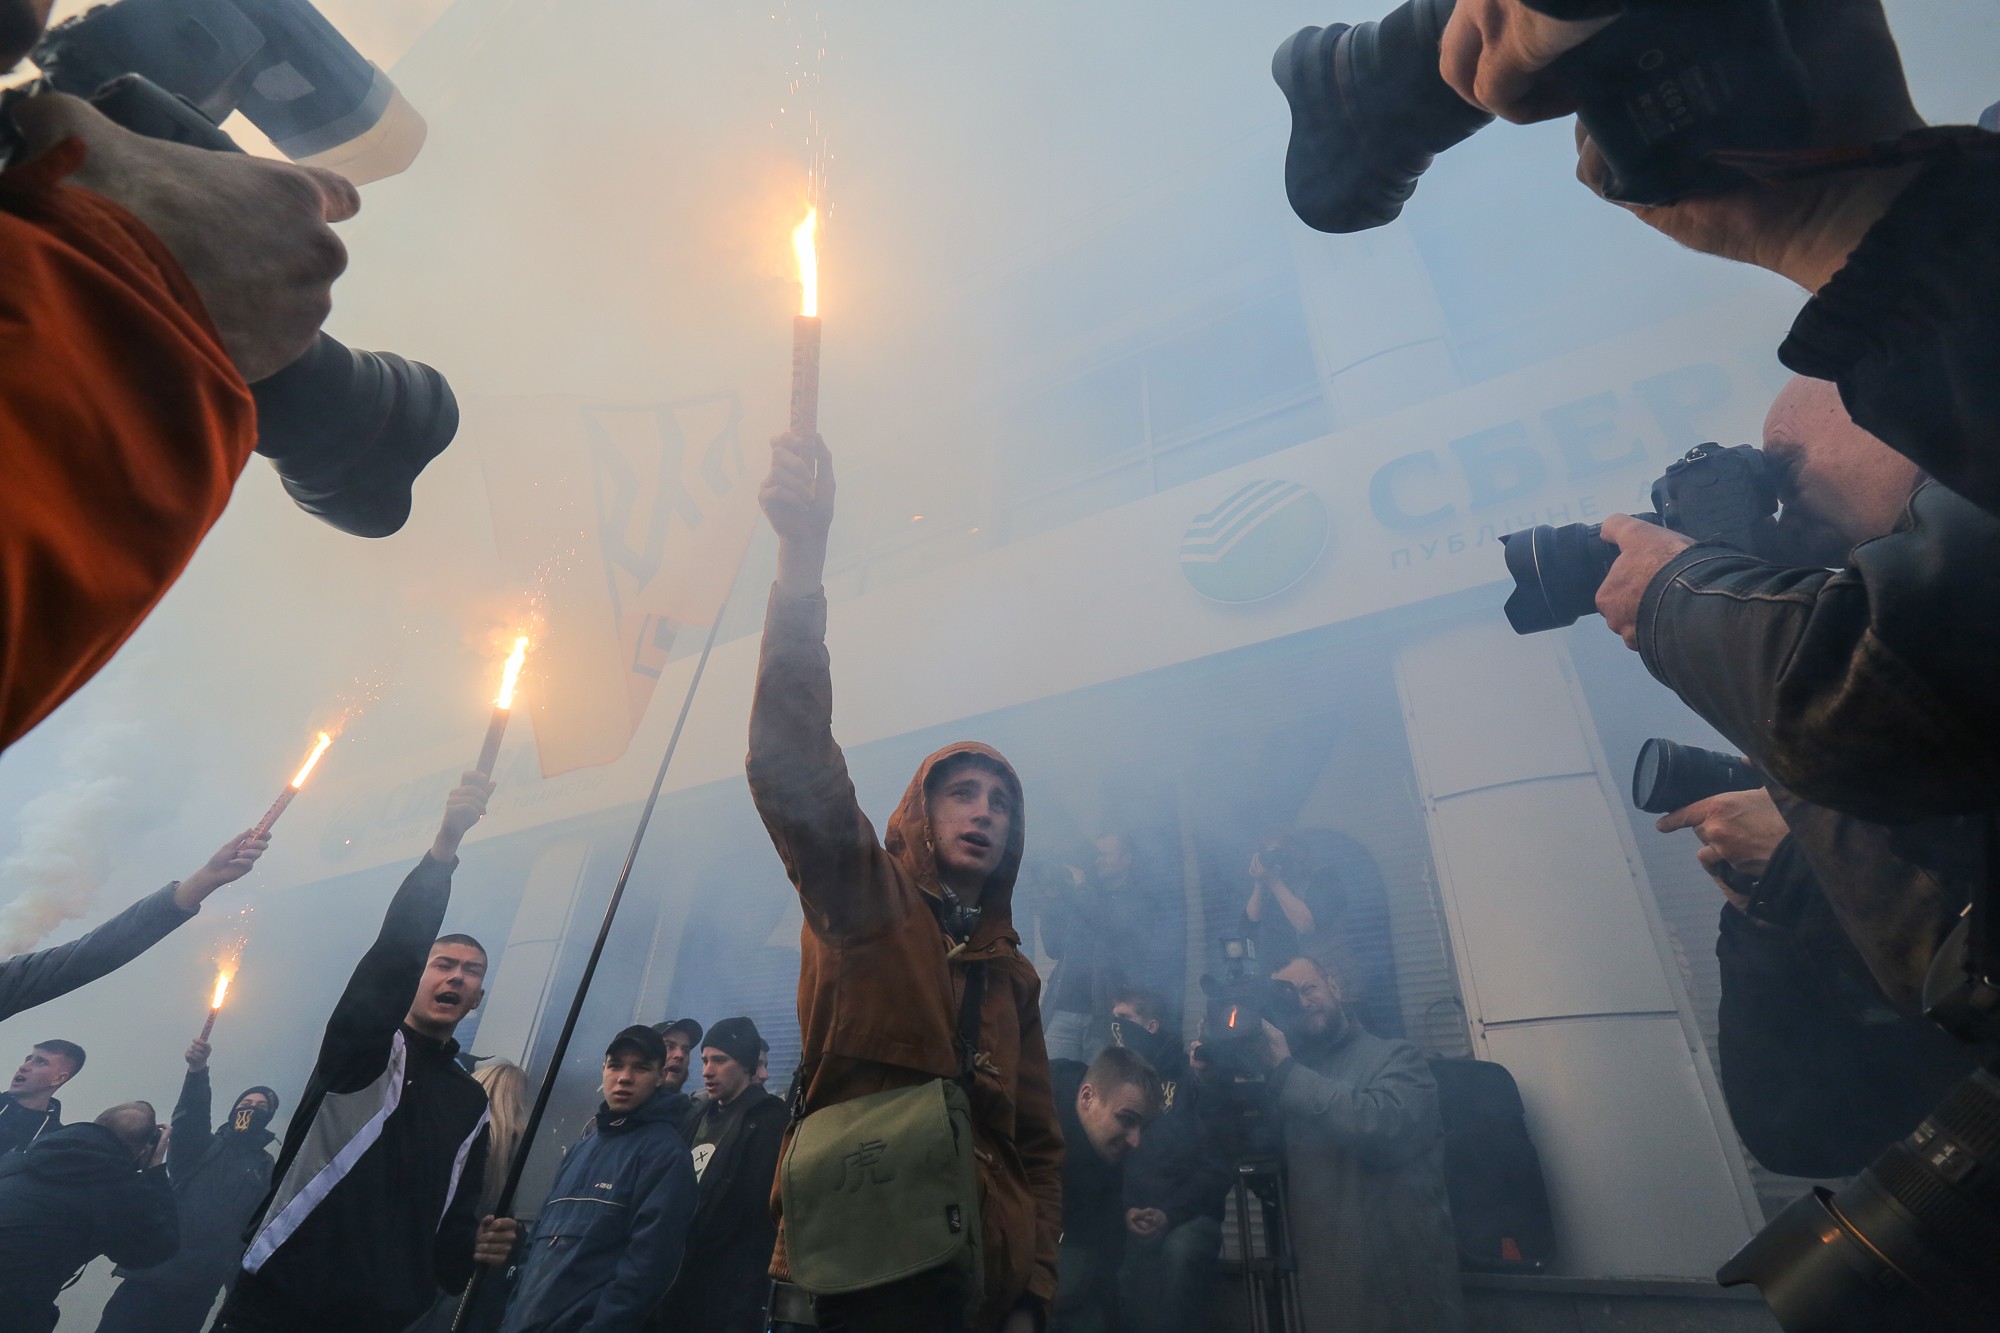 National Corps activists burn flares as they came to the Sberbank to close it with a concrite brick wall in order for Sberbank to stop its activity in Ukraine during their rally on March 13. (2017) 